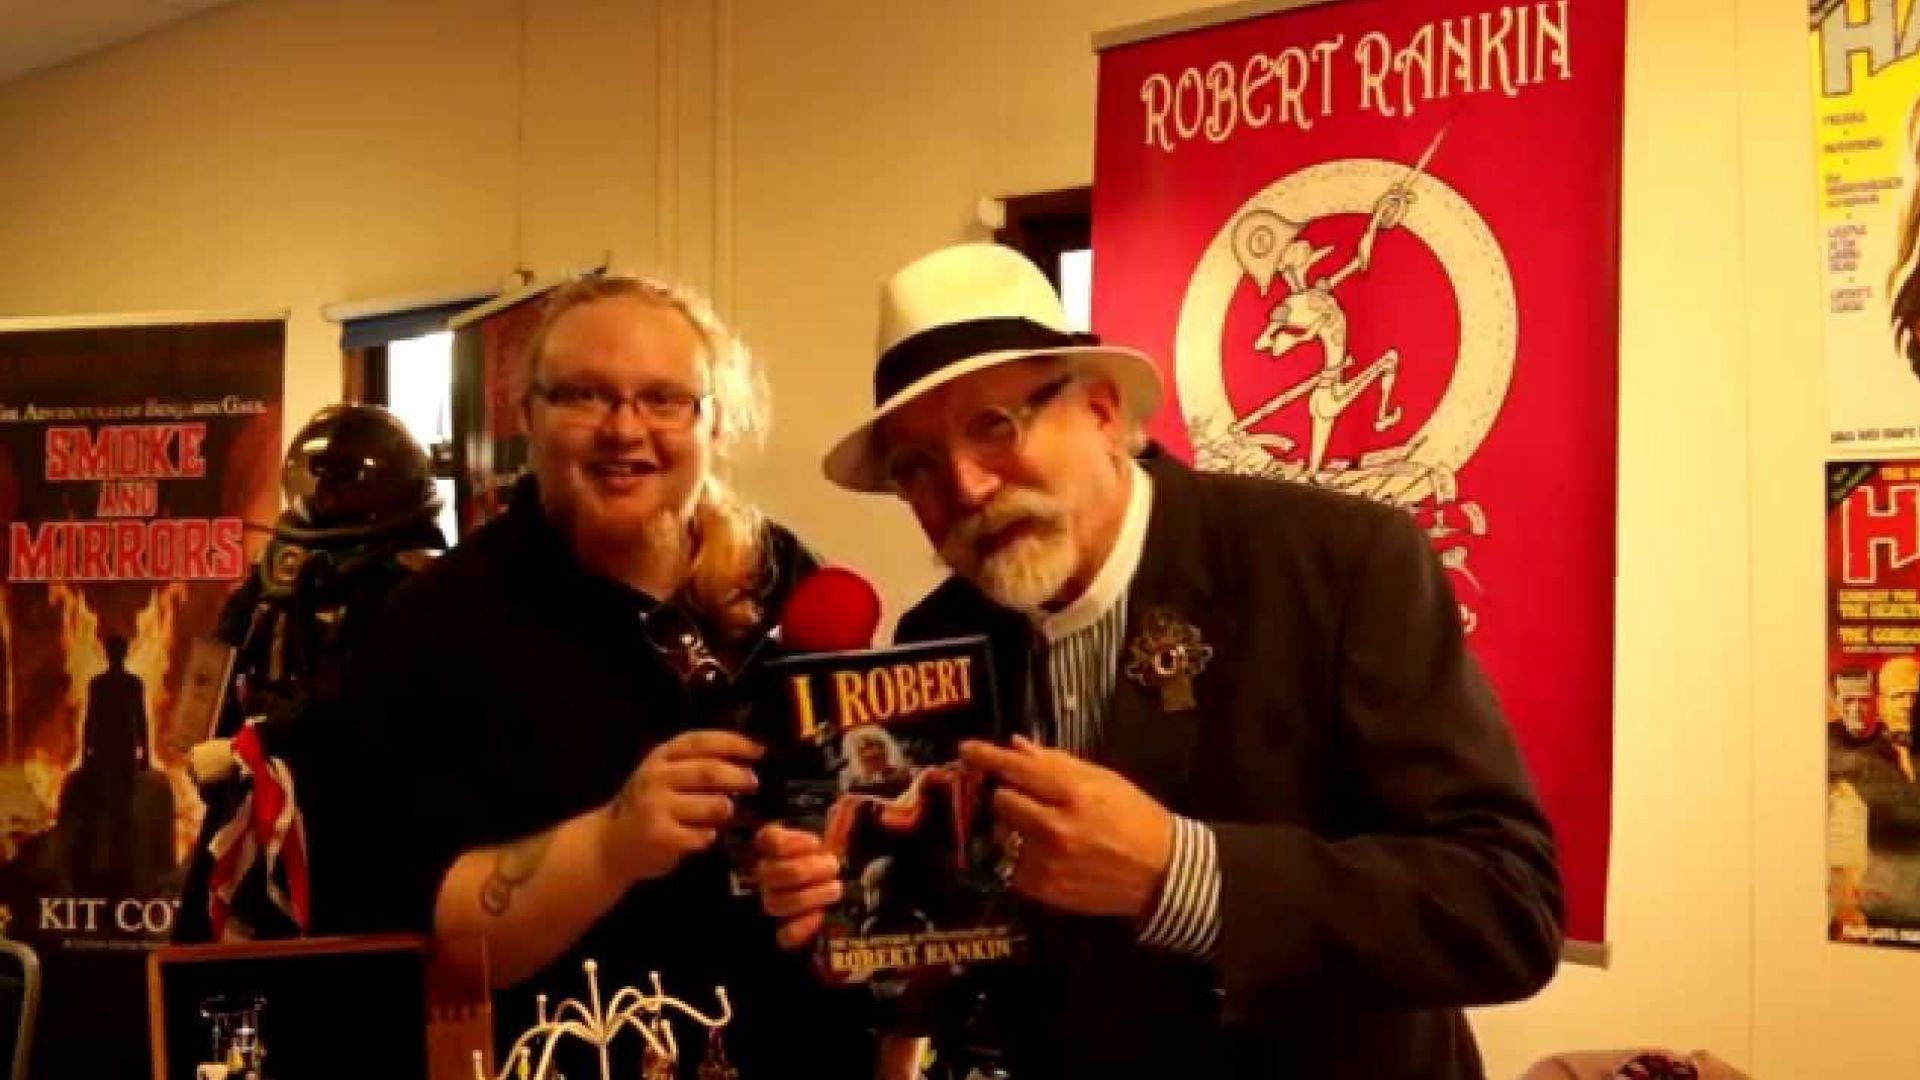 Chris talks to renowned writer Robert Ranking about his new 